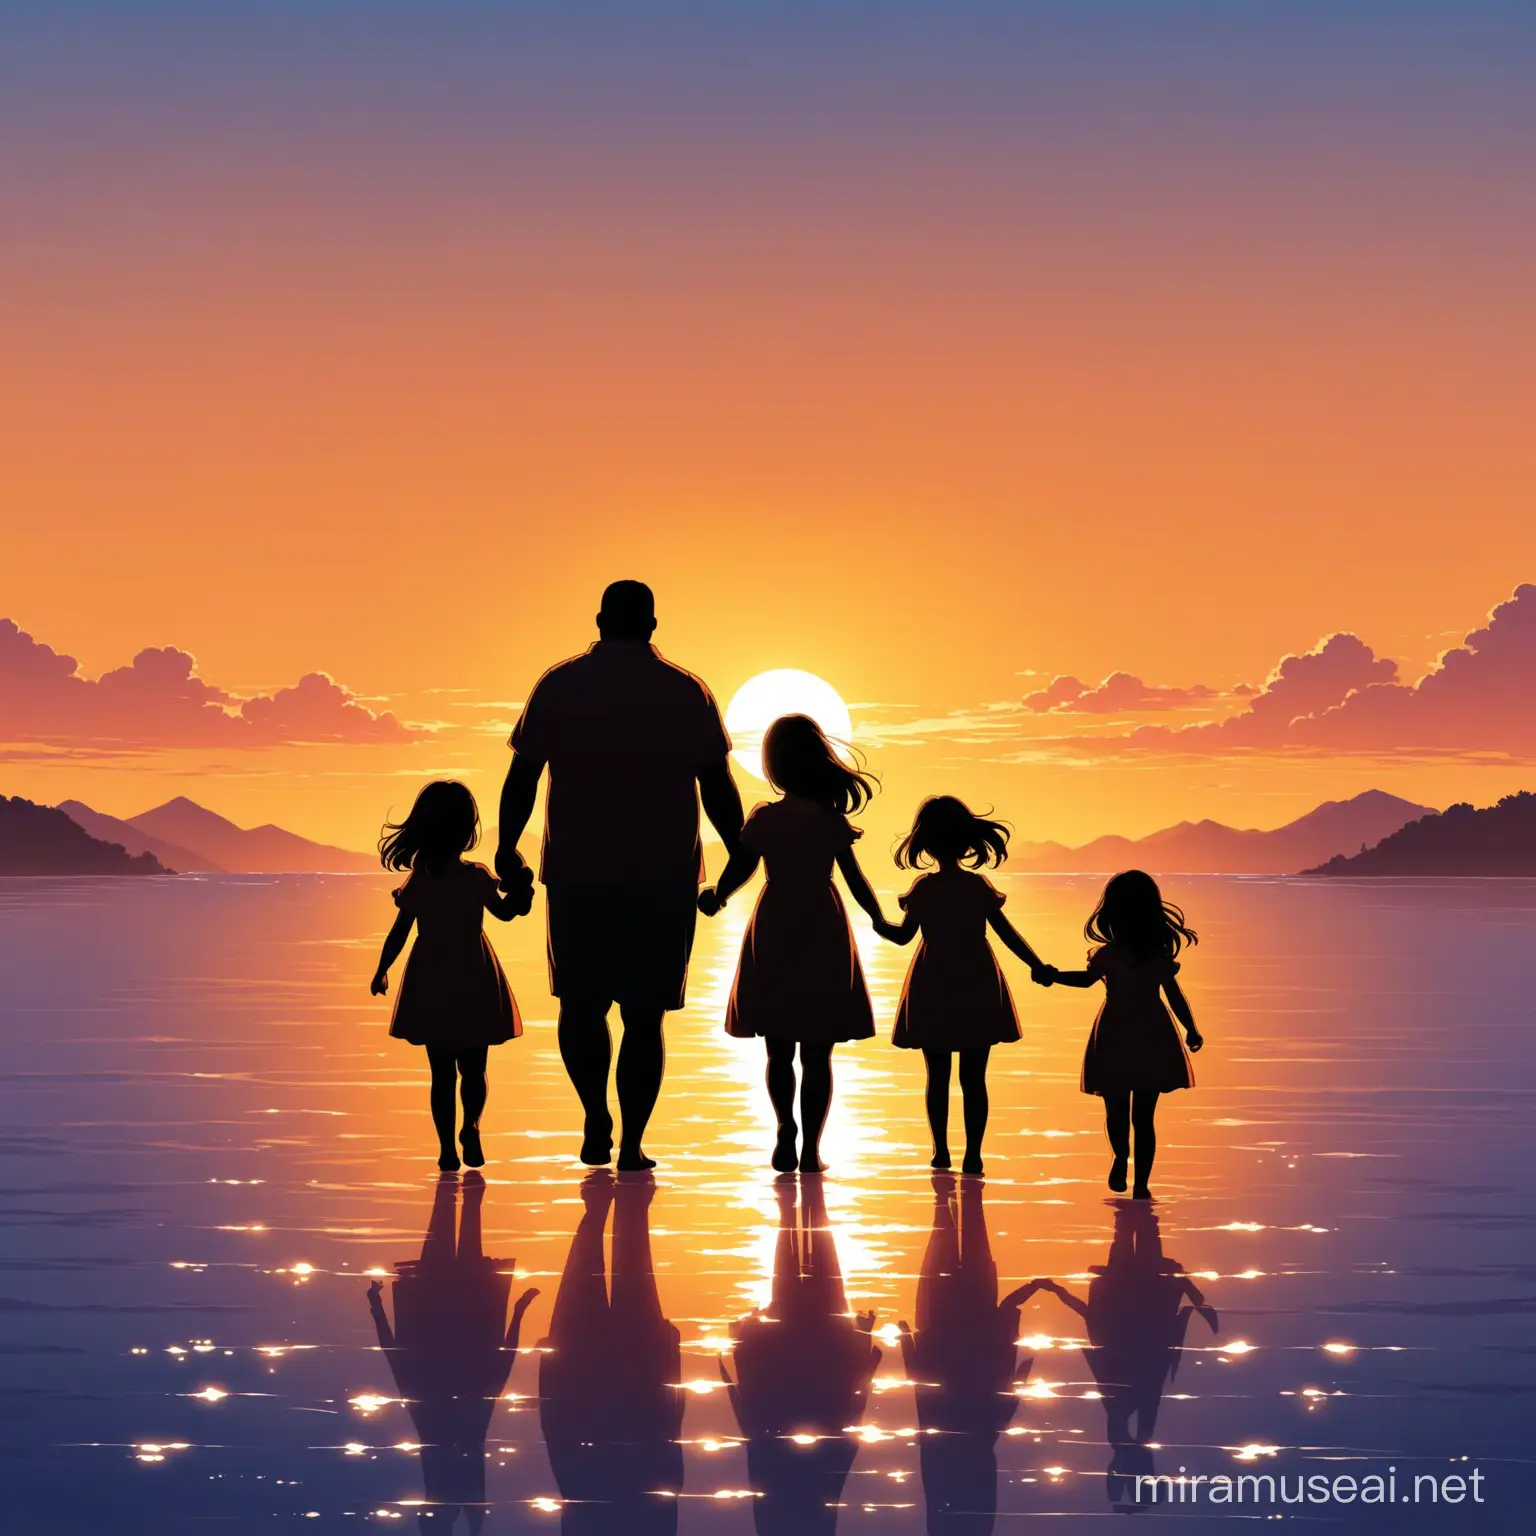 I need a silhouette of a family holding hands. These include a mom who has shoulder-length hair, a chubby dad, two chubby teenage sisters, a little girl who is three years old and a housewife. The background should be a beautiful landscape on the sea with the sunset.